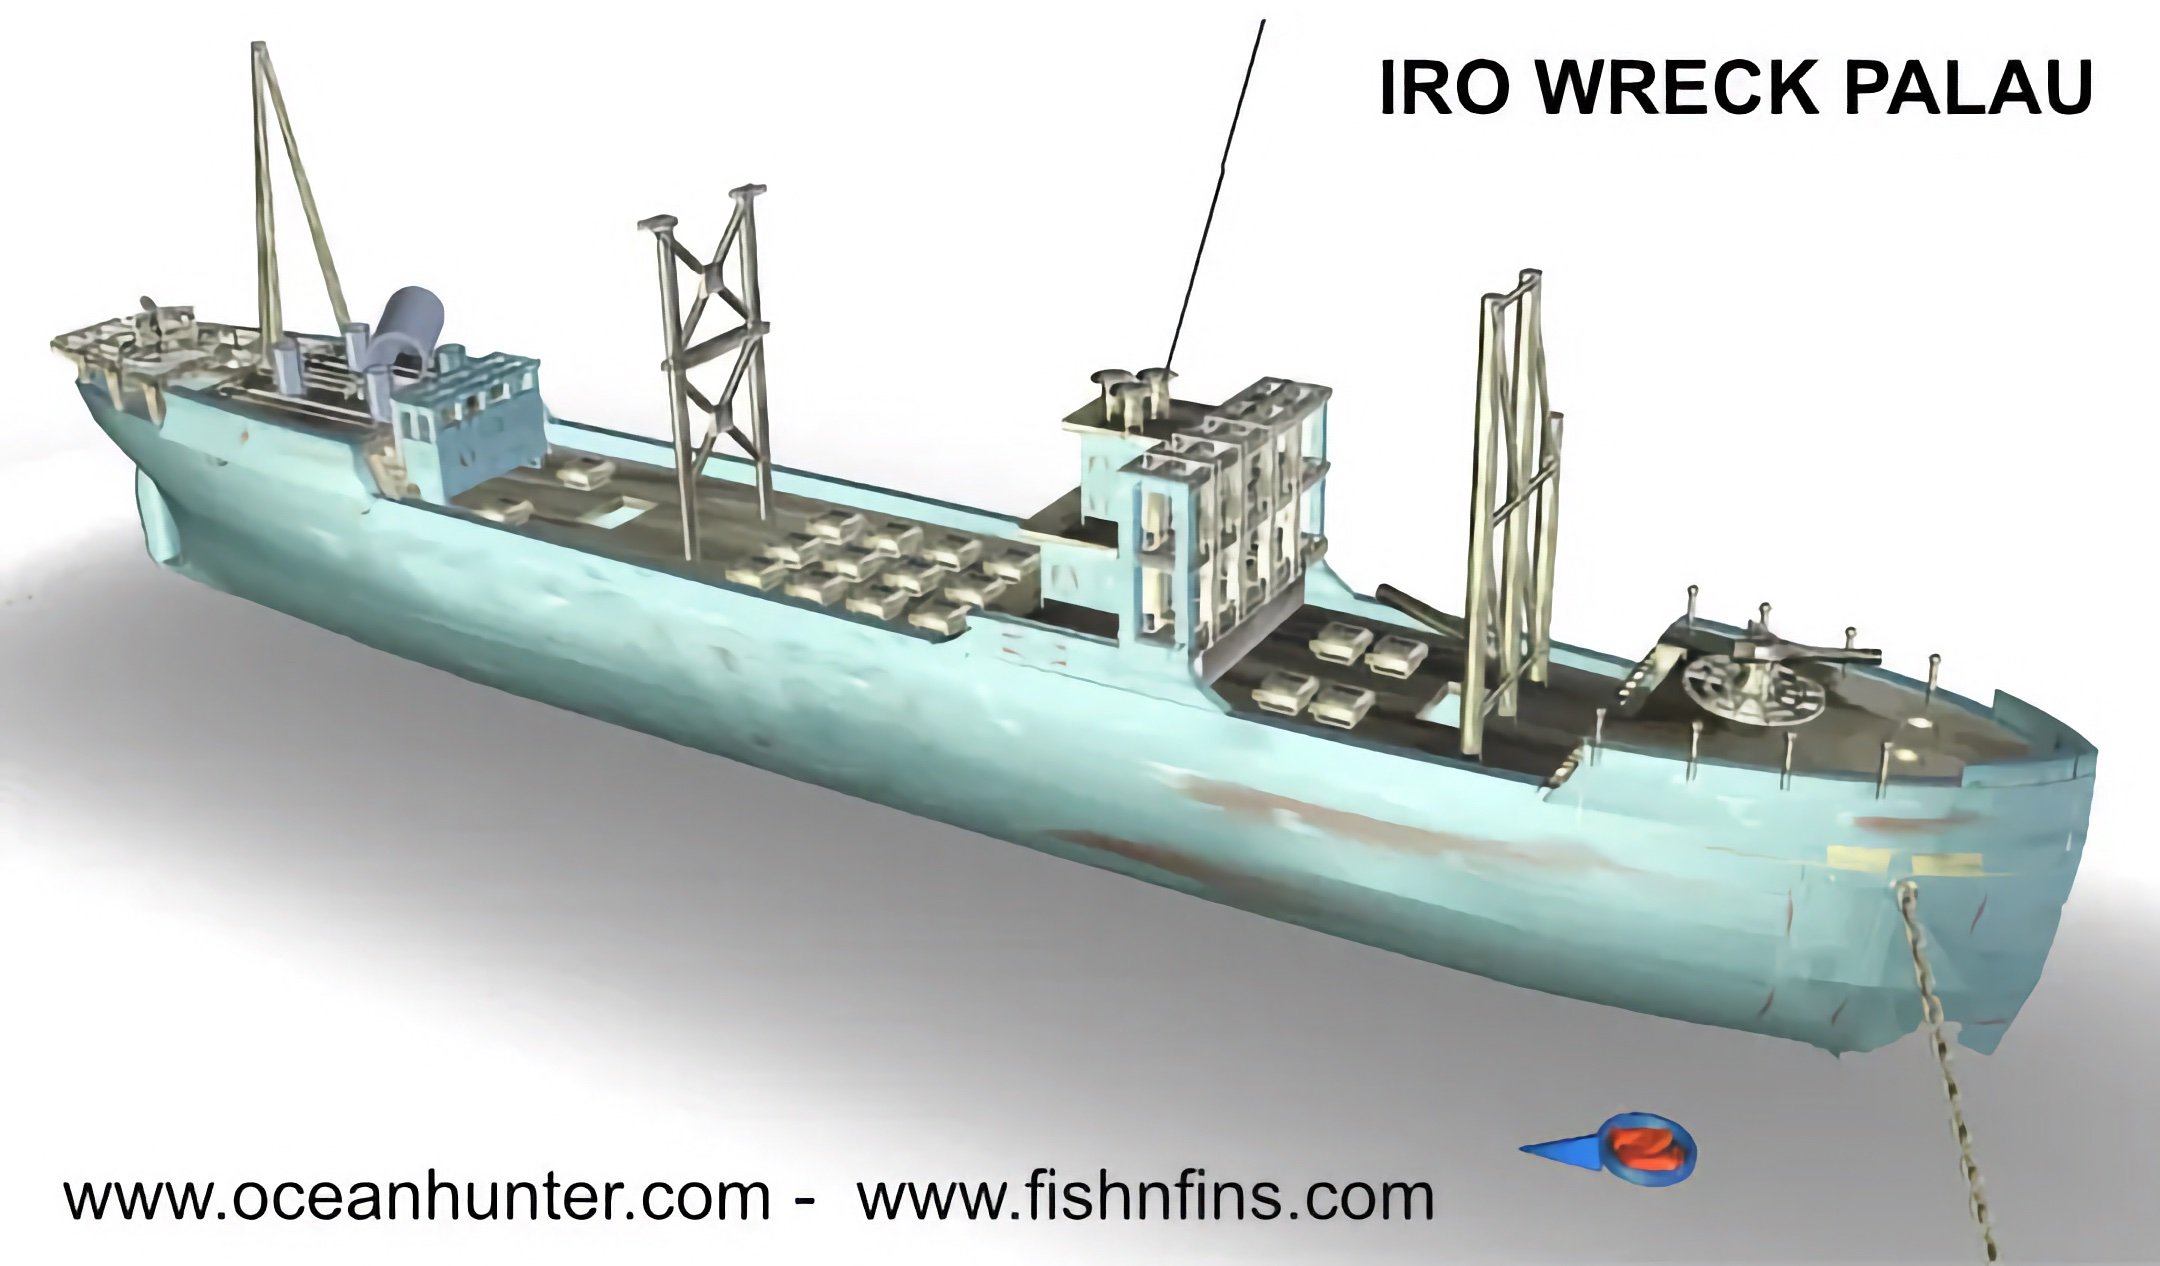 Fish ‘n Fins Illustration of the Iro showing the towers seen in my photos